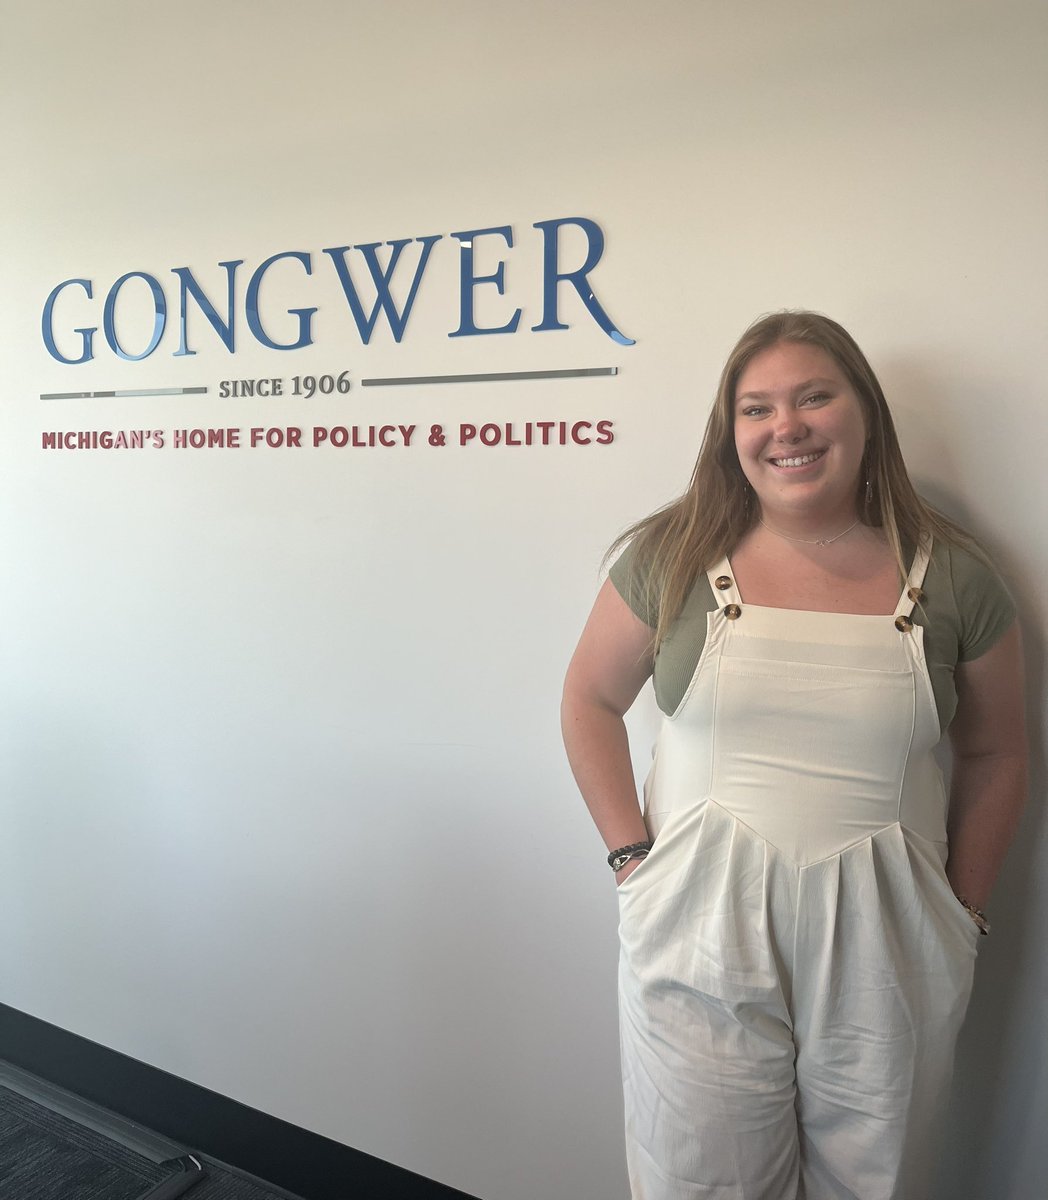 Officially done with my first day @GongwerMichigan as the Reporting Intern for the summer! Can’t wait to dig into all things MI politics! hit my line at lnass@gongwer.com